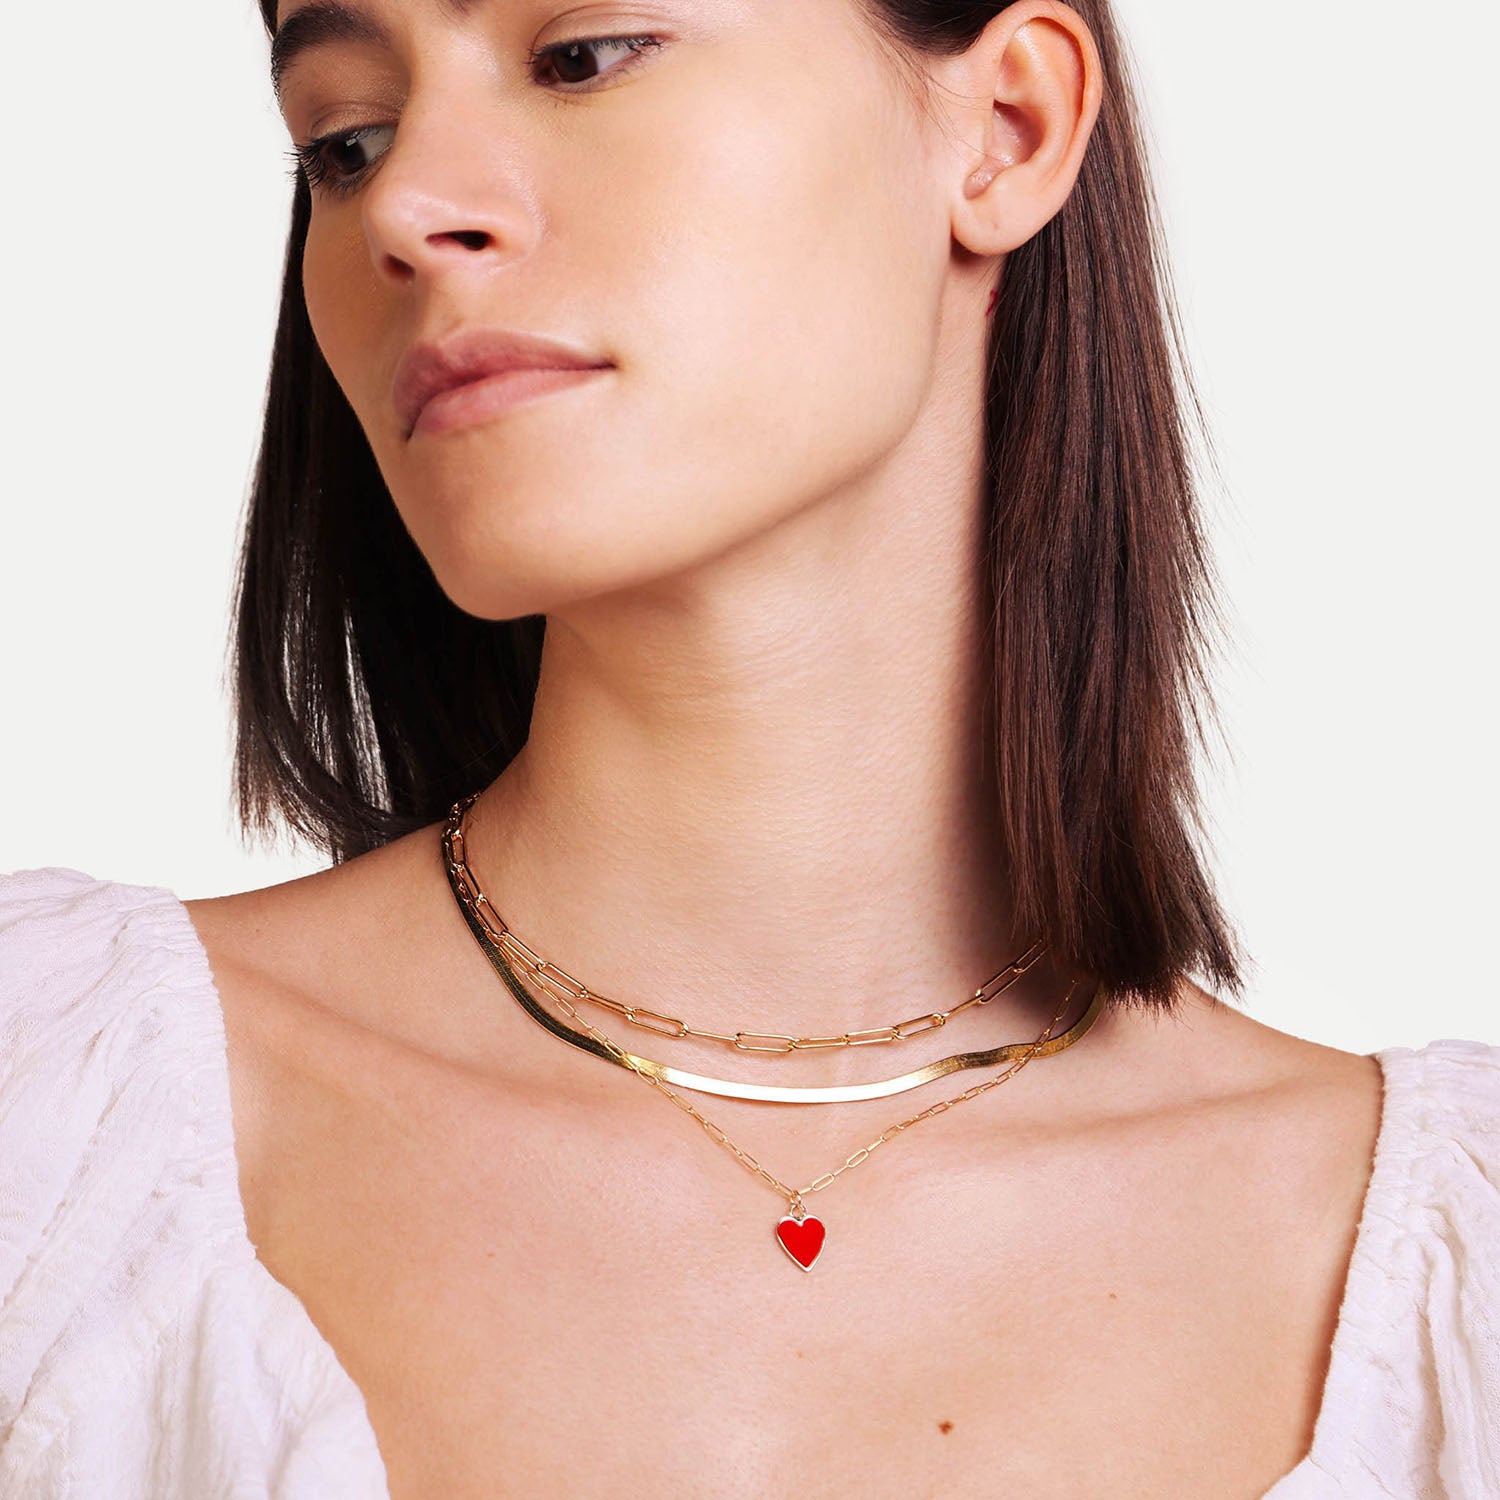 Female Model Wearing Layered Red and Gold Heart Necklace Anna - Playa Luna Jewelry